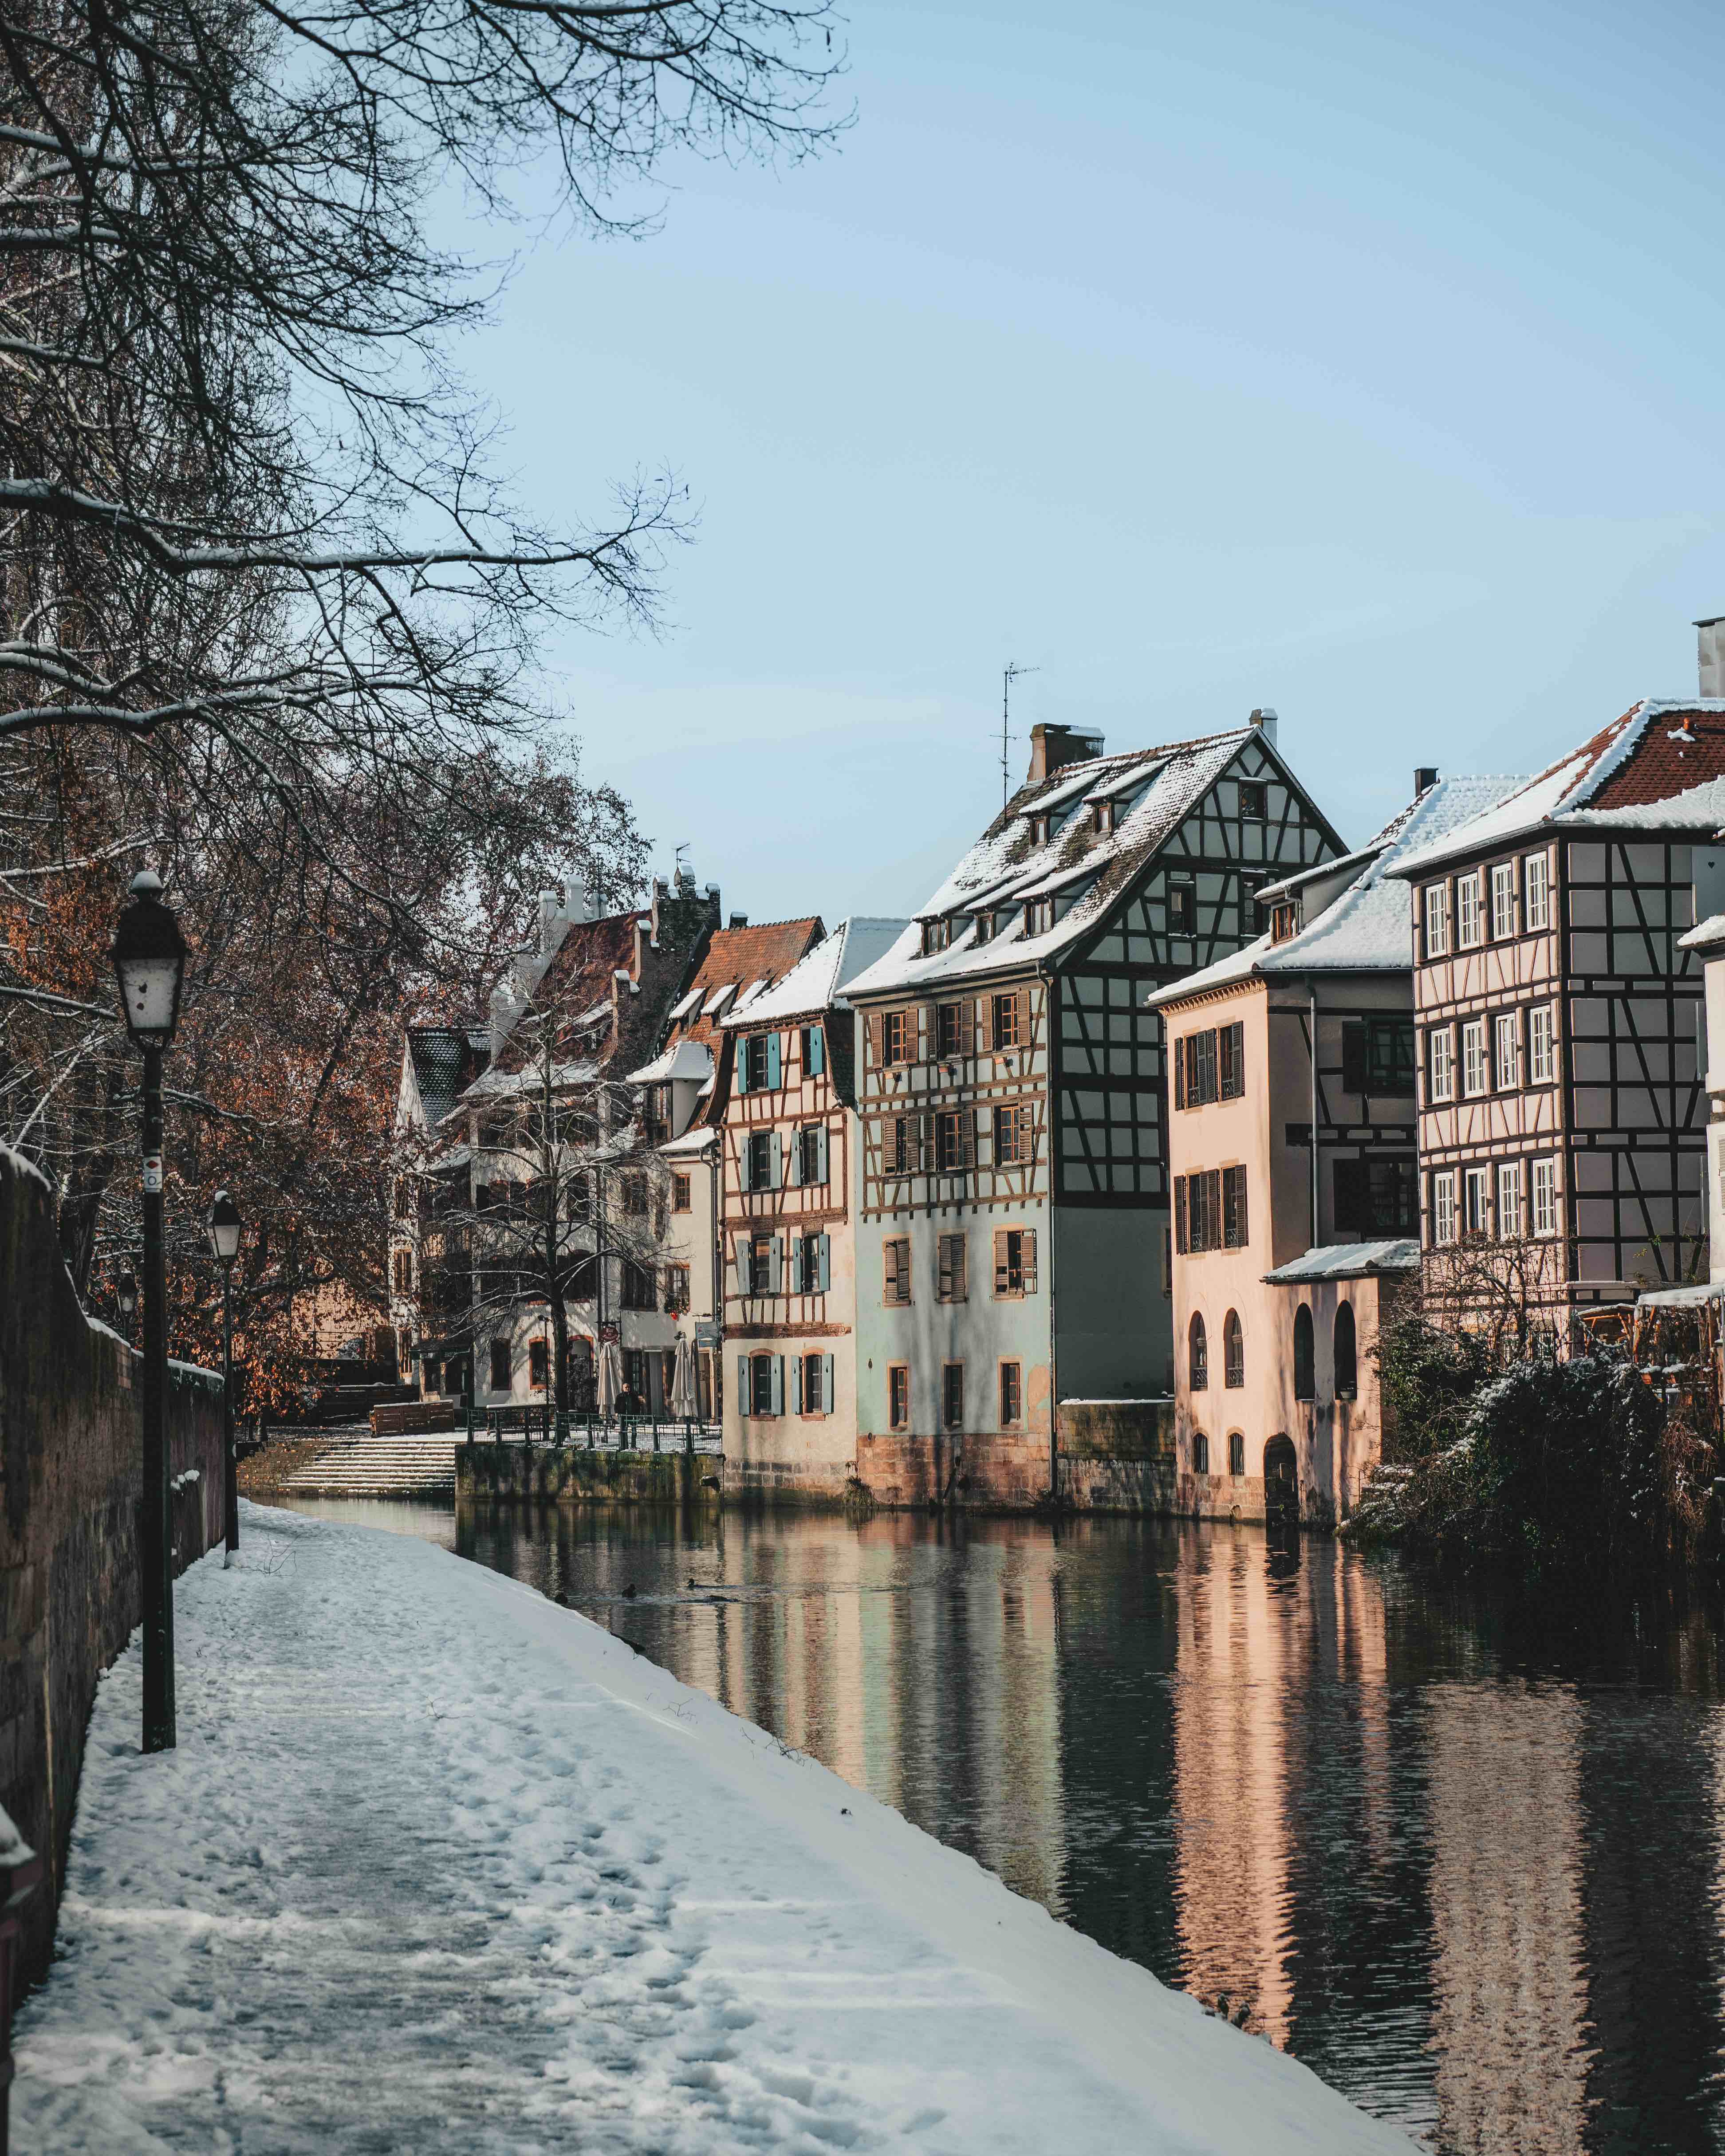 
Strasbourg around Christmas time truly is special but finding an affordable place to stay then may be rather tricky // Photo credit @travelwithadrien